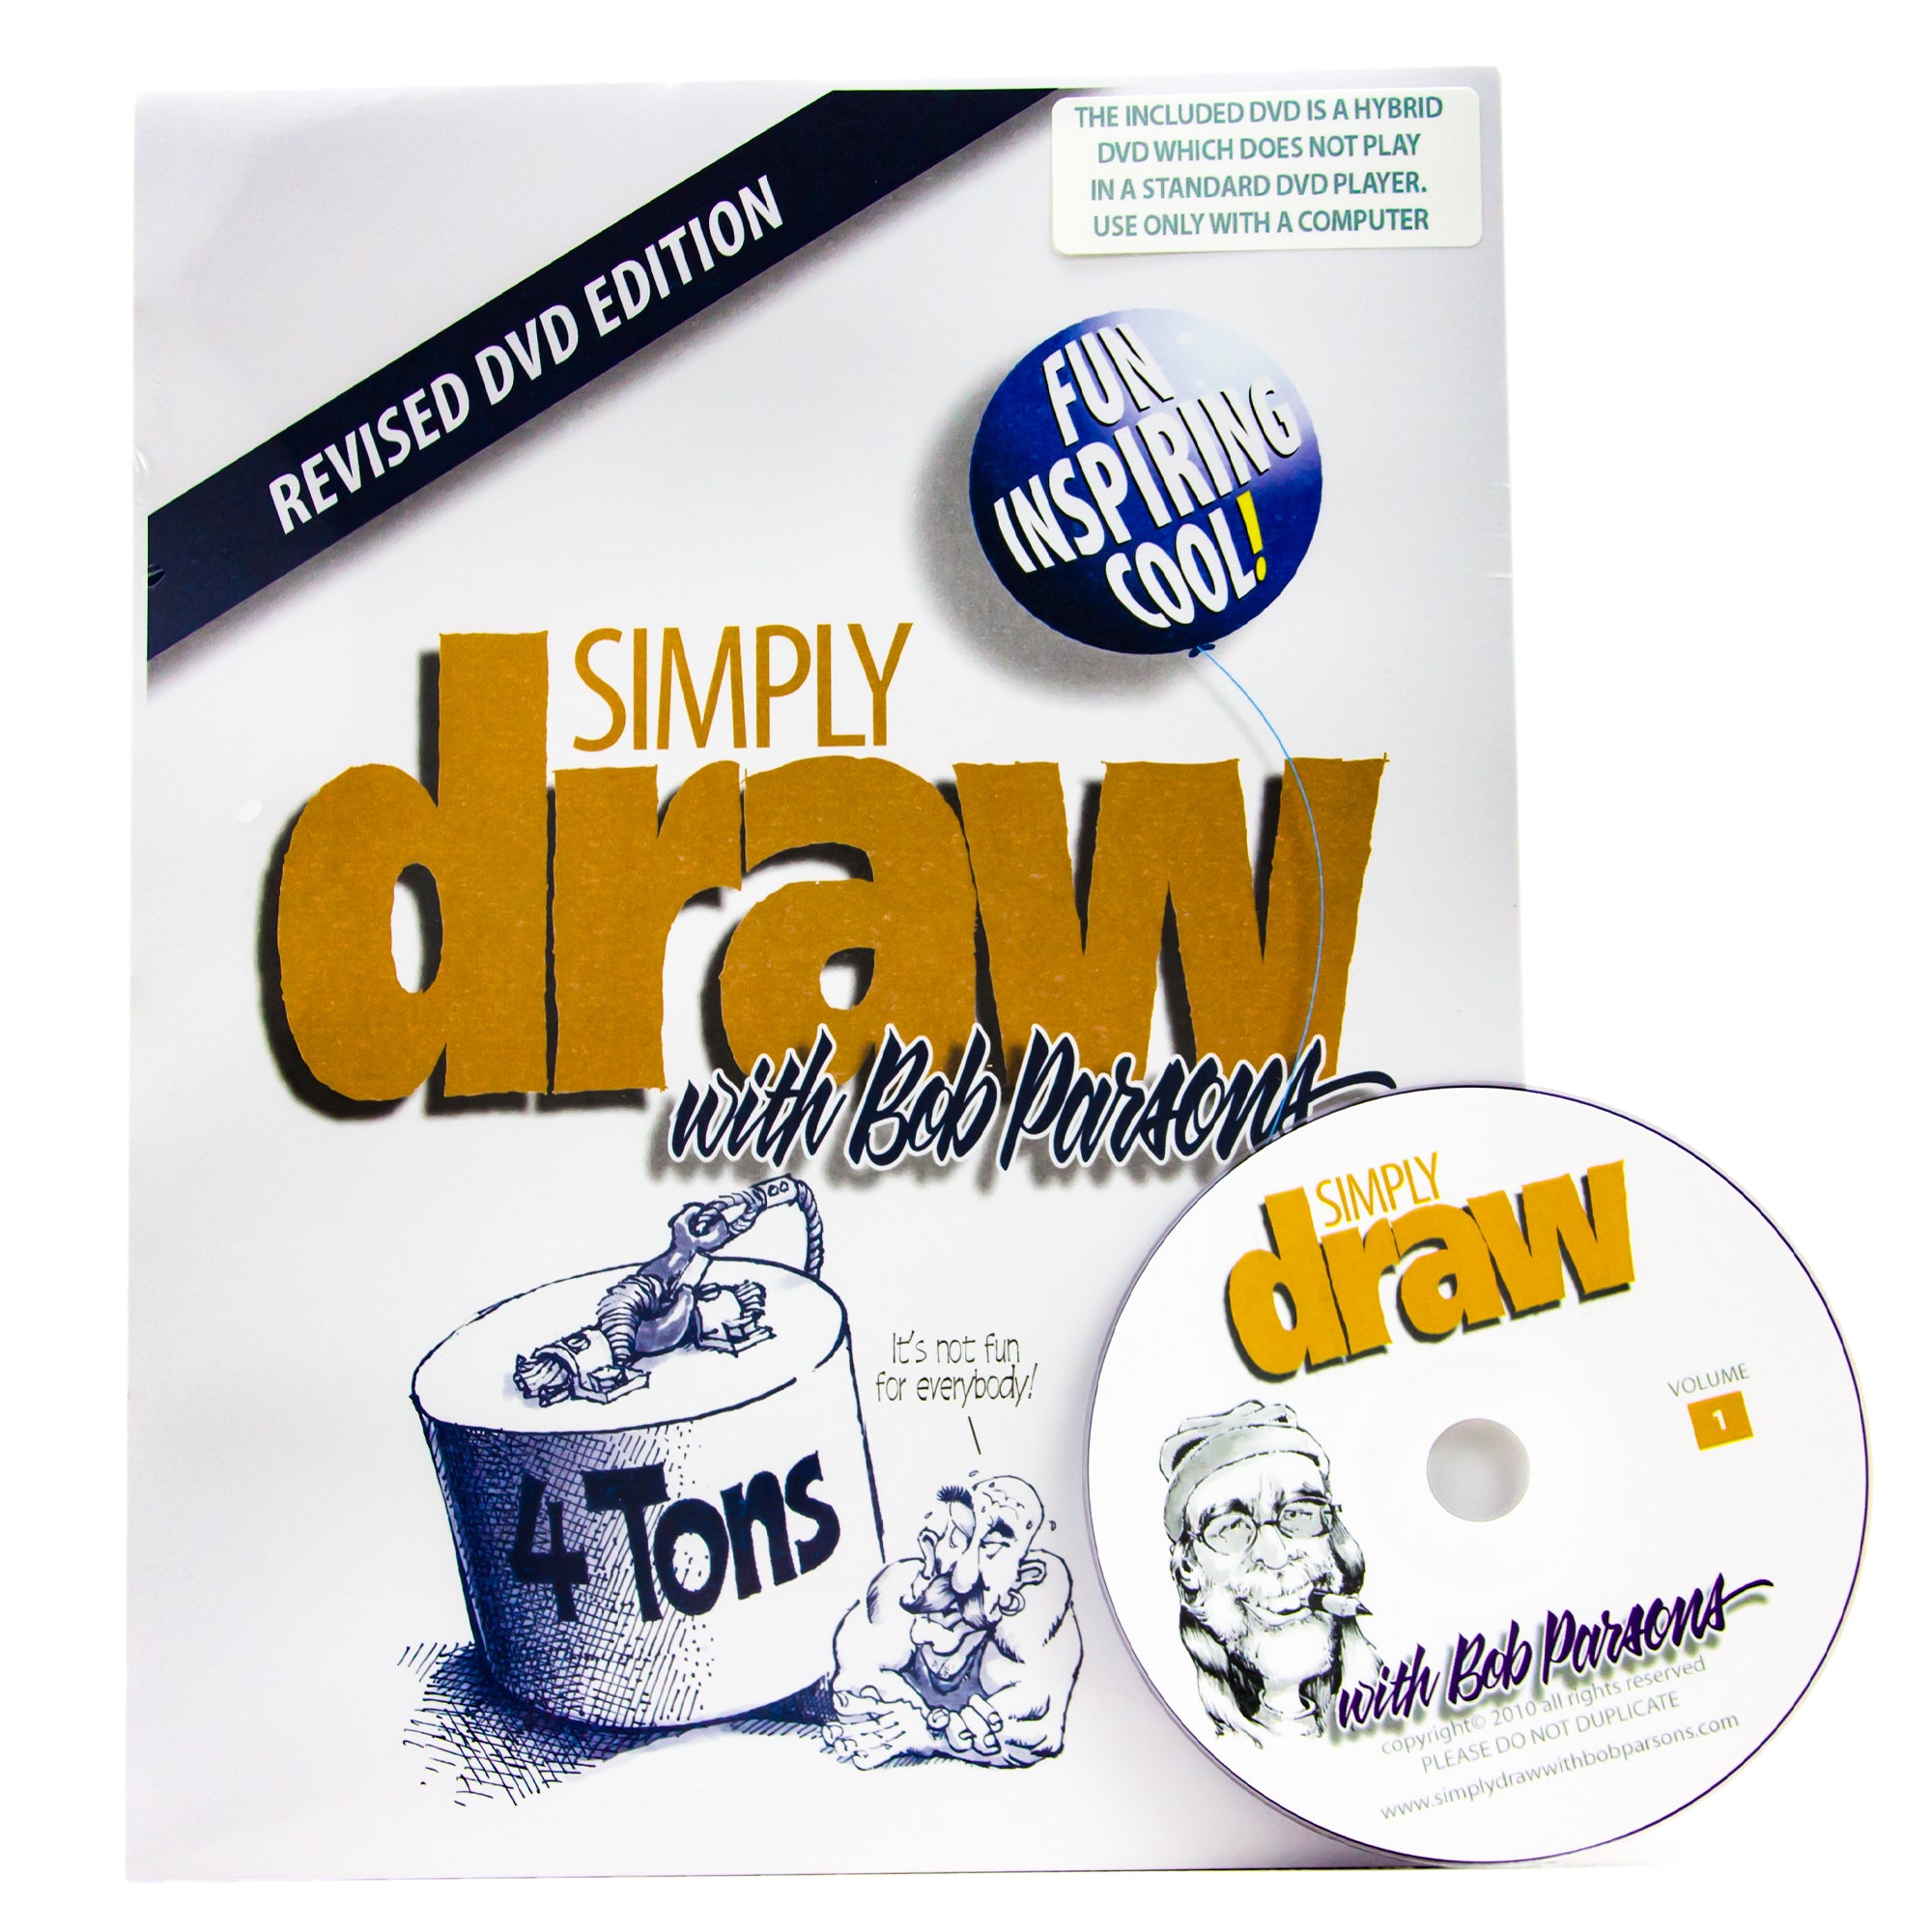 Simply Draw with Bob Parsons cover and CD-Rom. Cover shows a sketch of a 4 ton round weight on top of a very muscular bald man with a long mustache. Disc shows a sketch of Bob Parsons wearing a soft hat over long hair, glasses, large teeth, and a pencil sticking out of his mouth like a cigarette. 